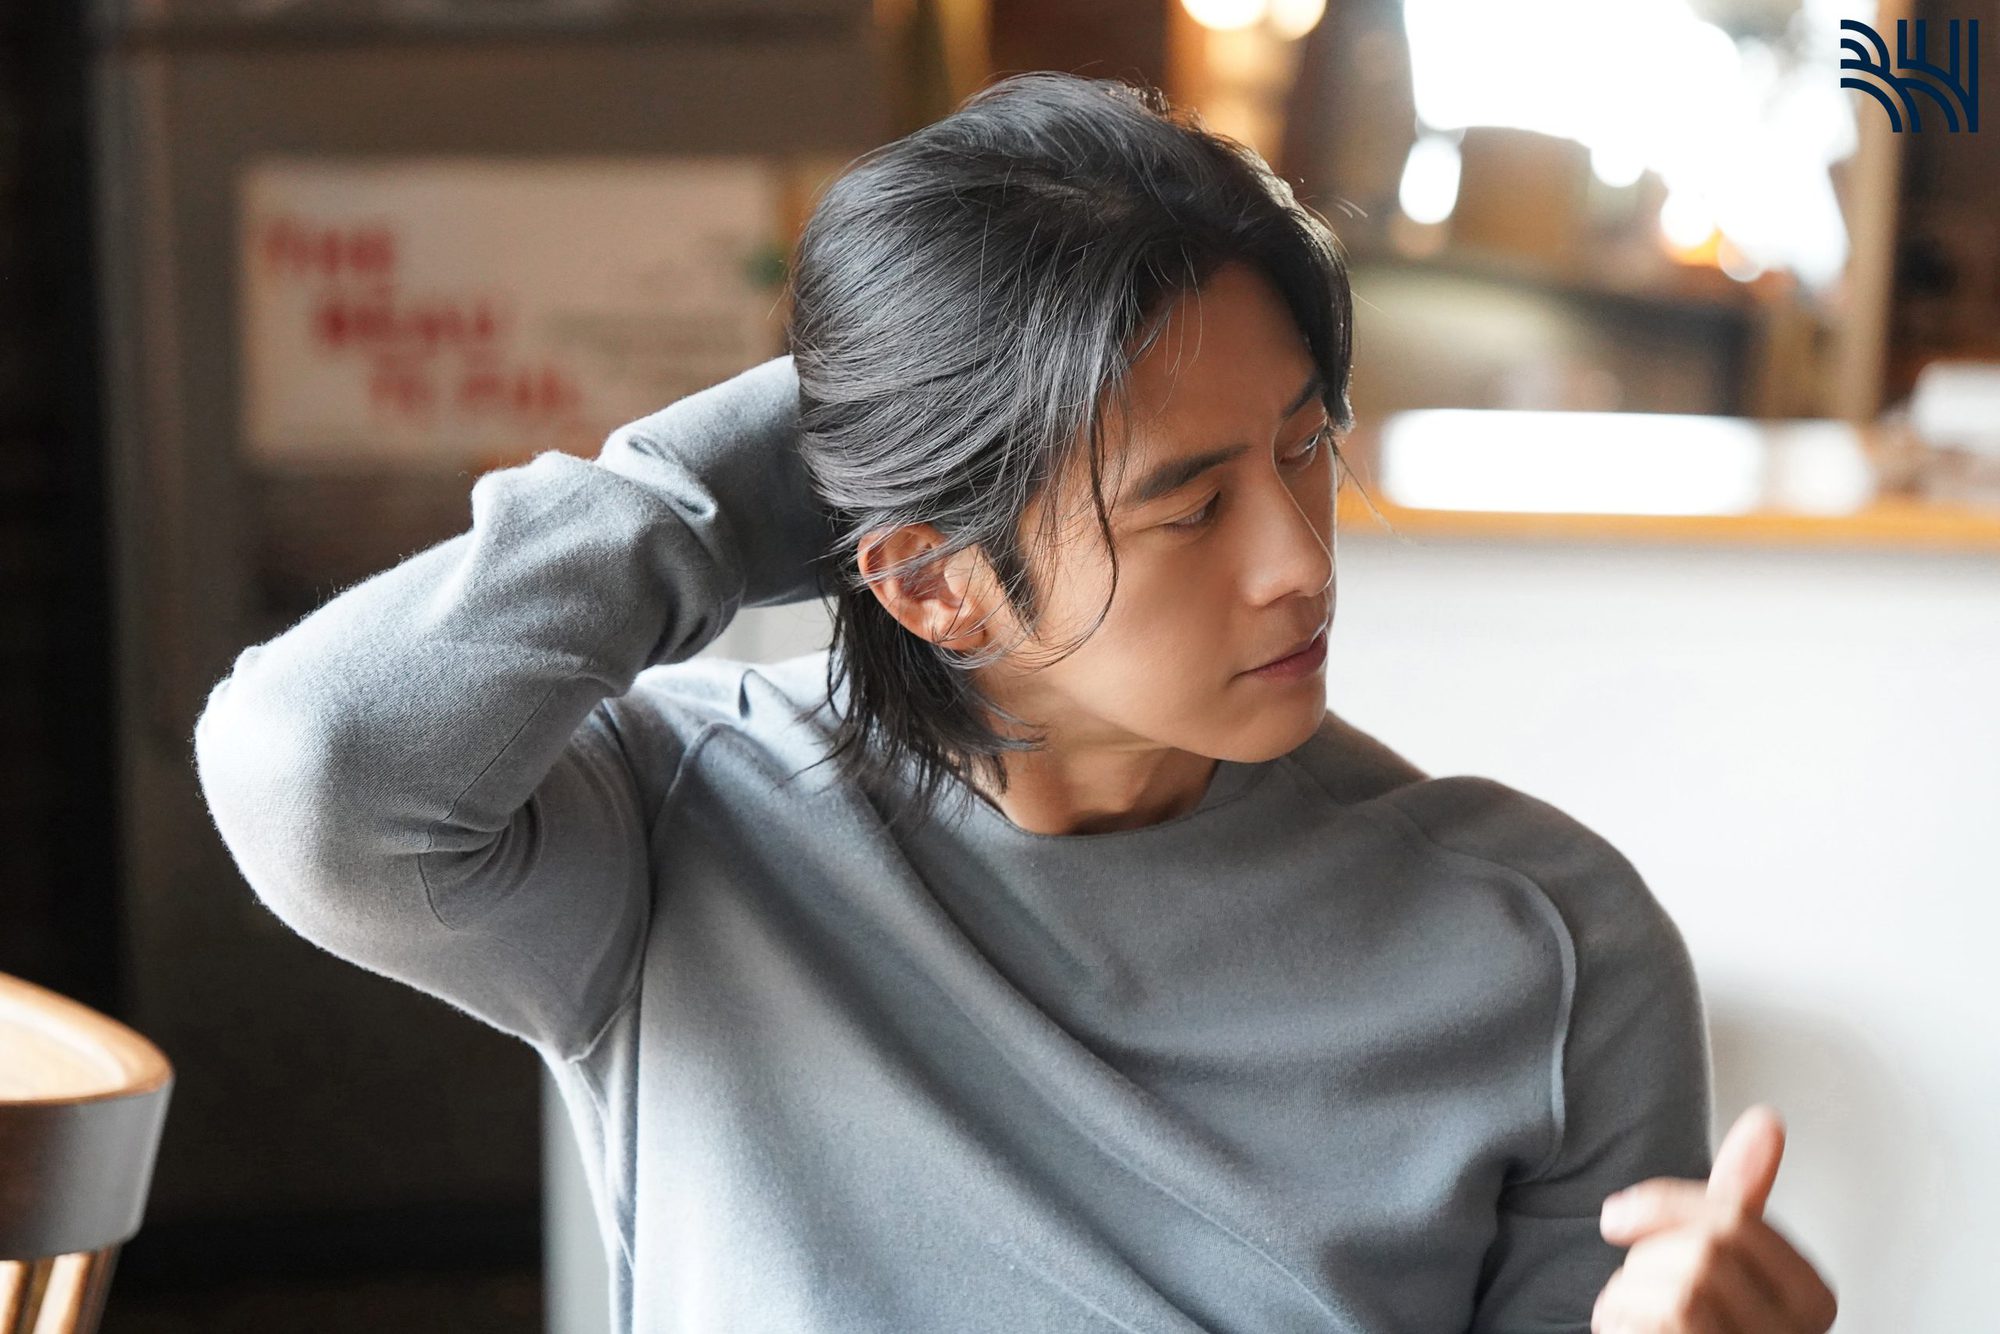 Go Soo: Kbiz's standard male beauty, 10 years of marriage still hides the image of his wife and children - Photo 5.